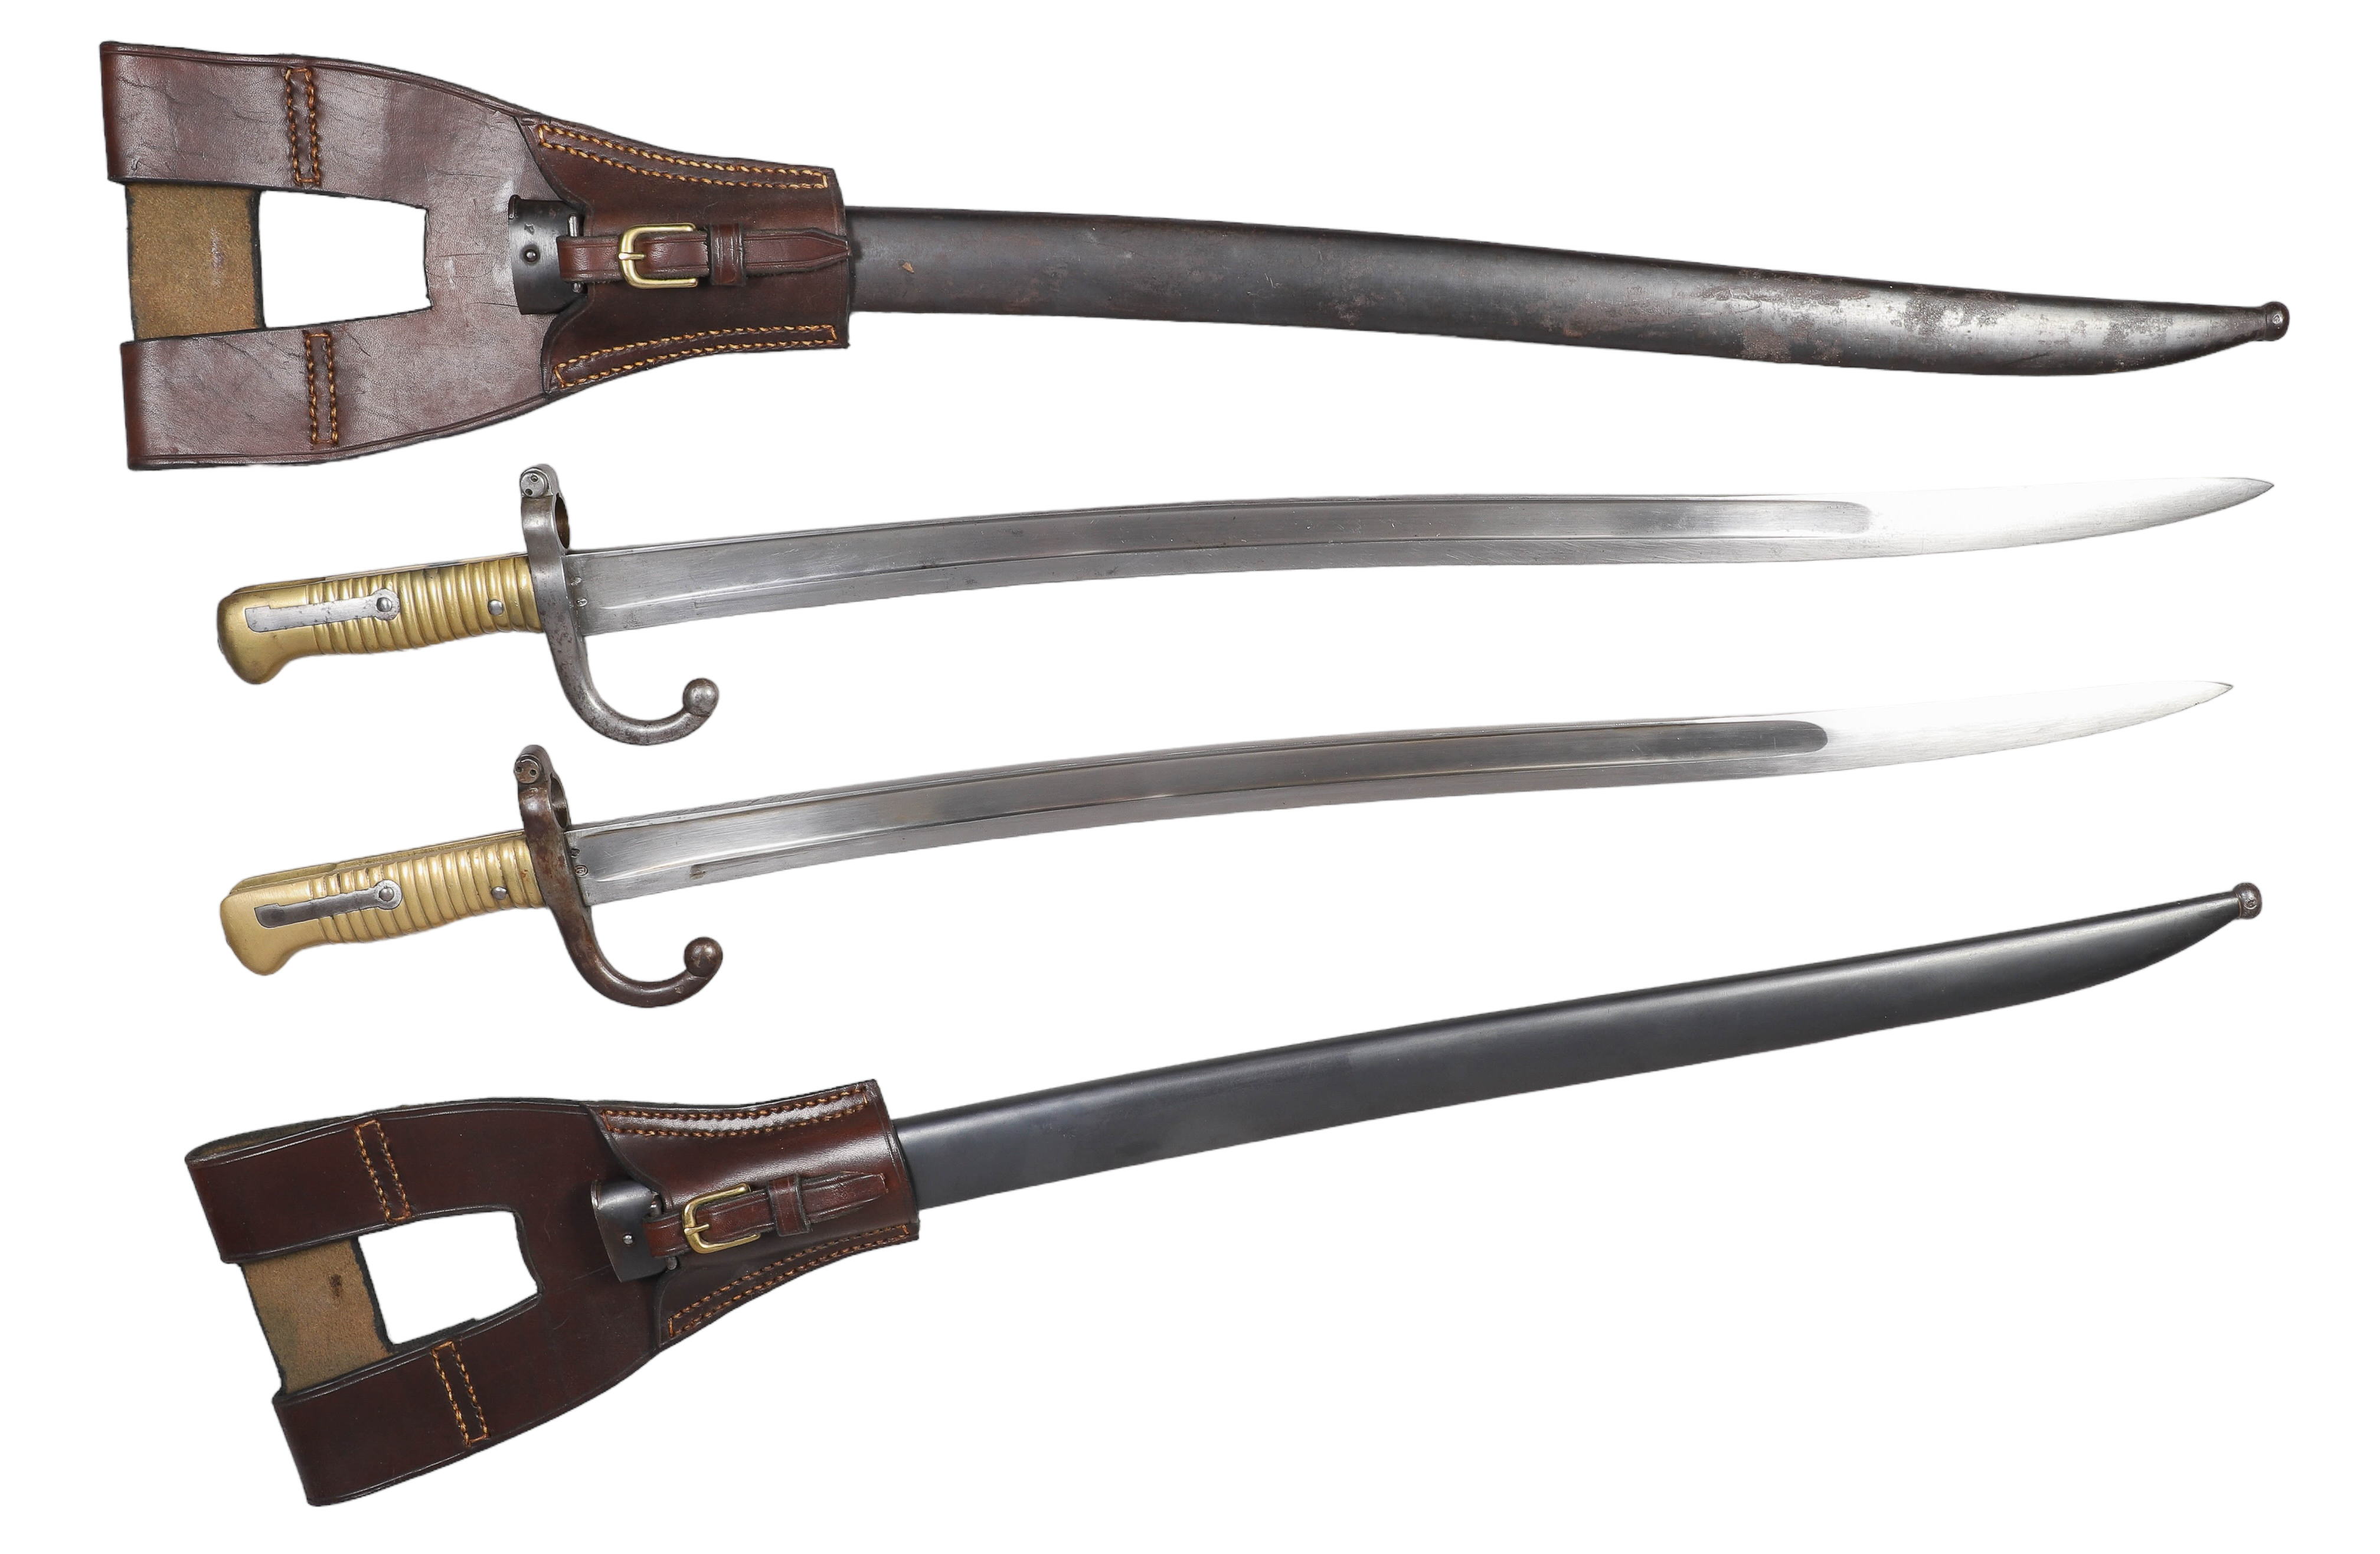 (2) French Bayonets, each with metal